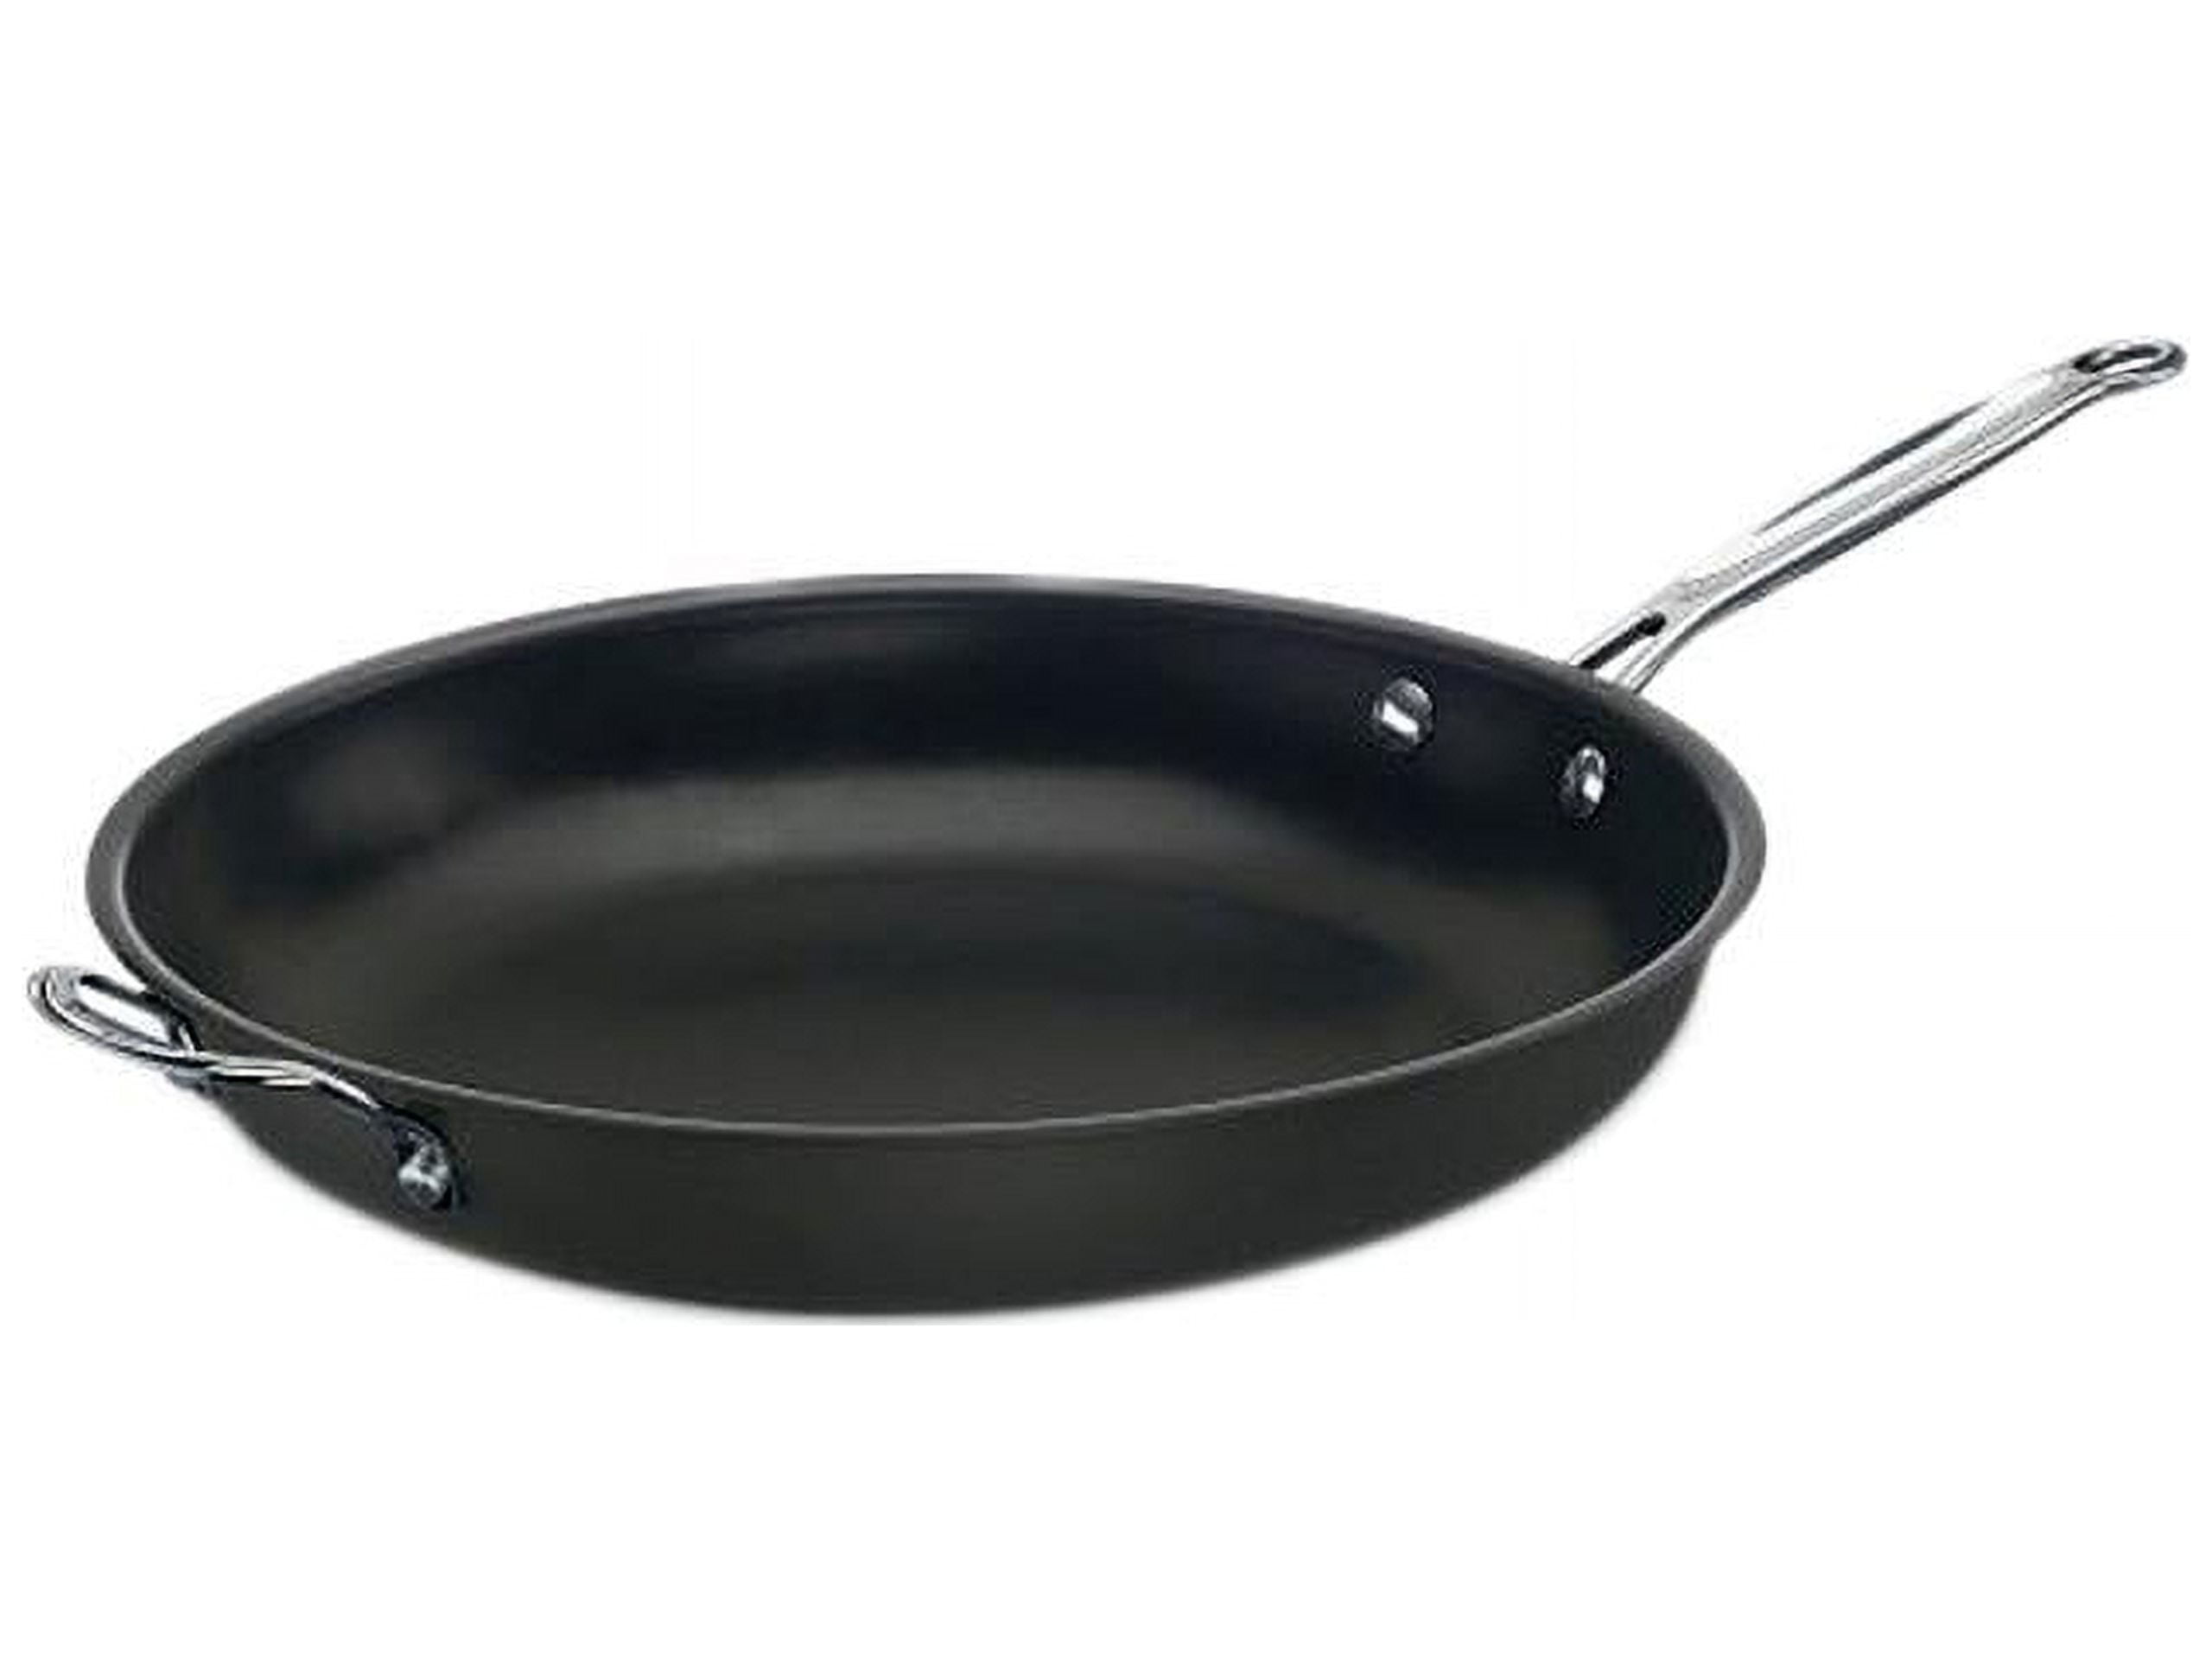 Cuisinart Chef's Classic Non-Stick Hard Anodized 14 inch Skillet with Helper Handle, 622-36hp1